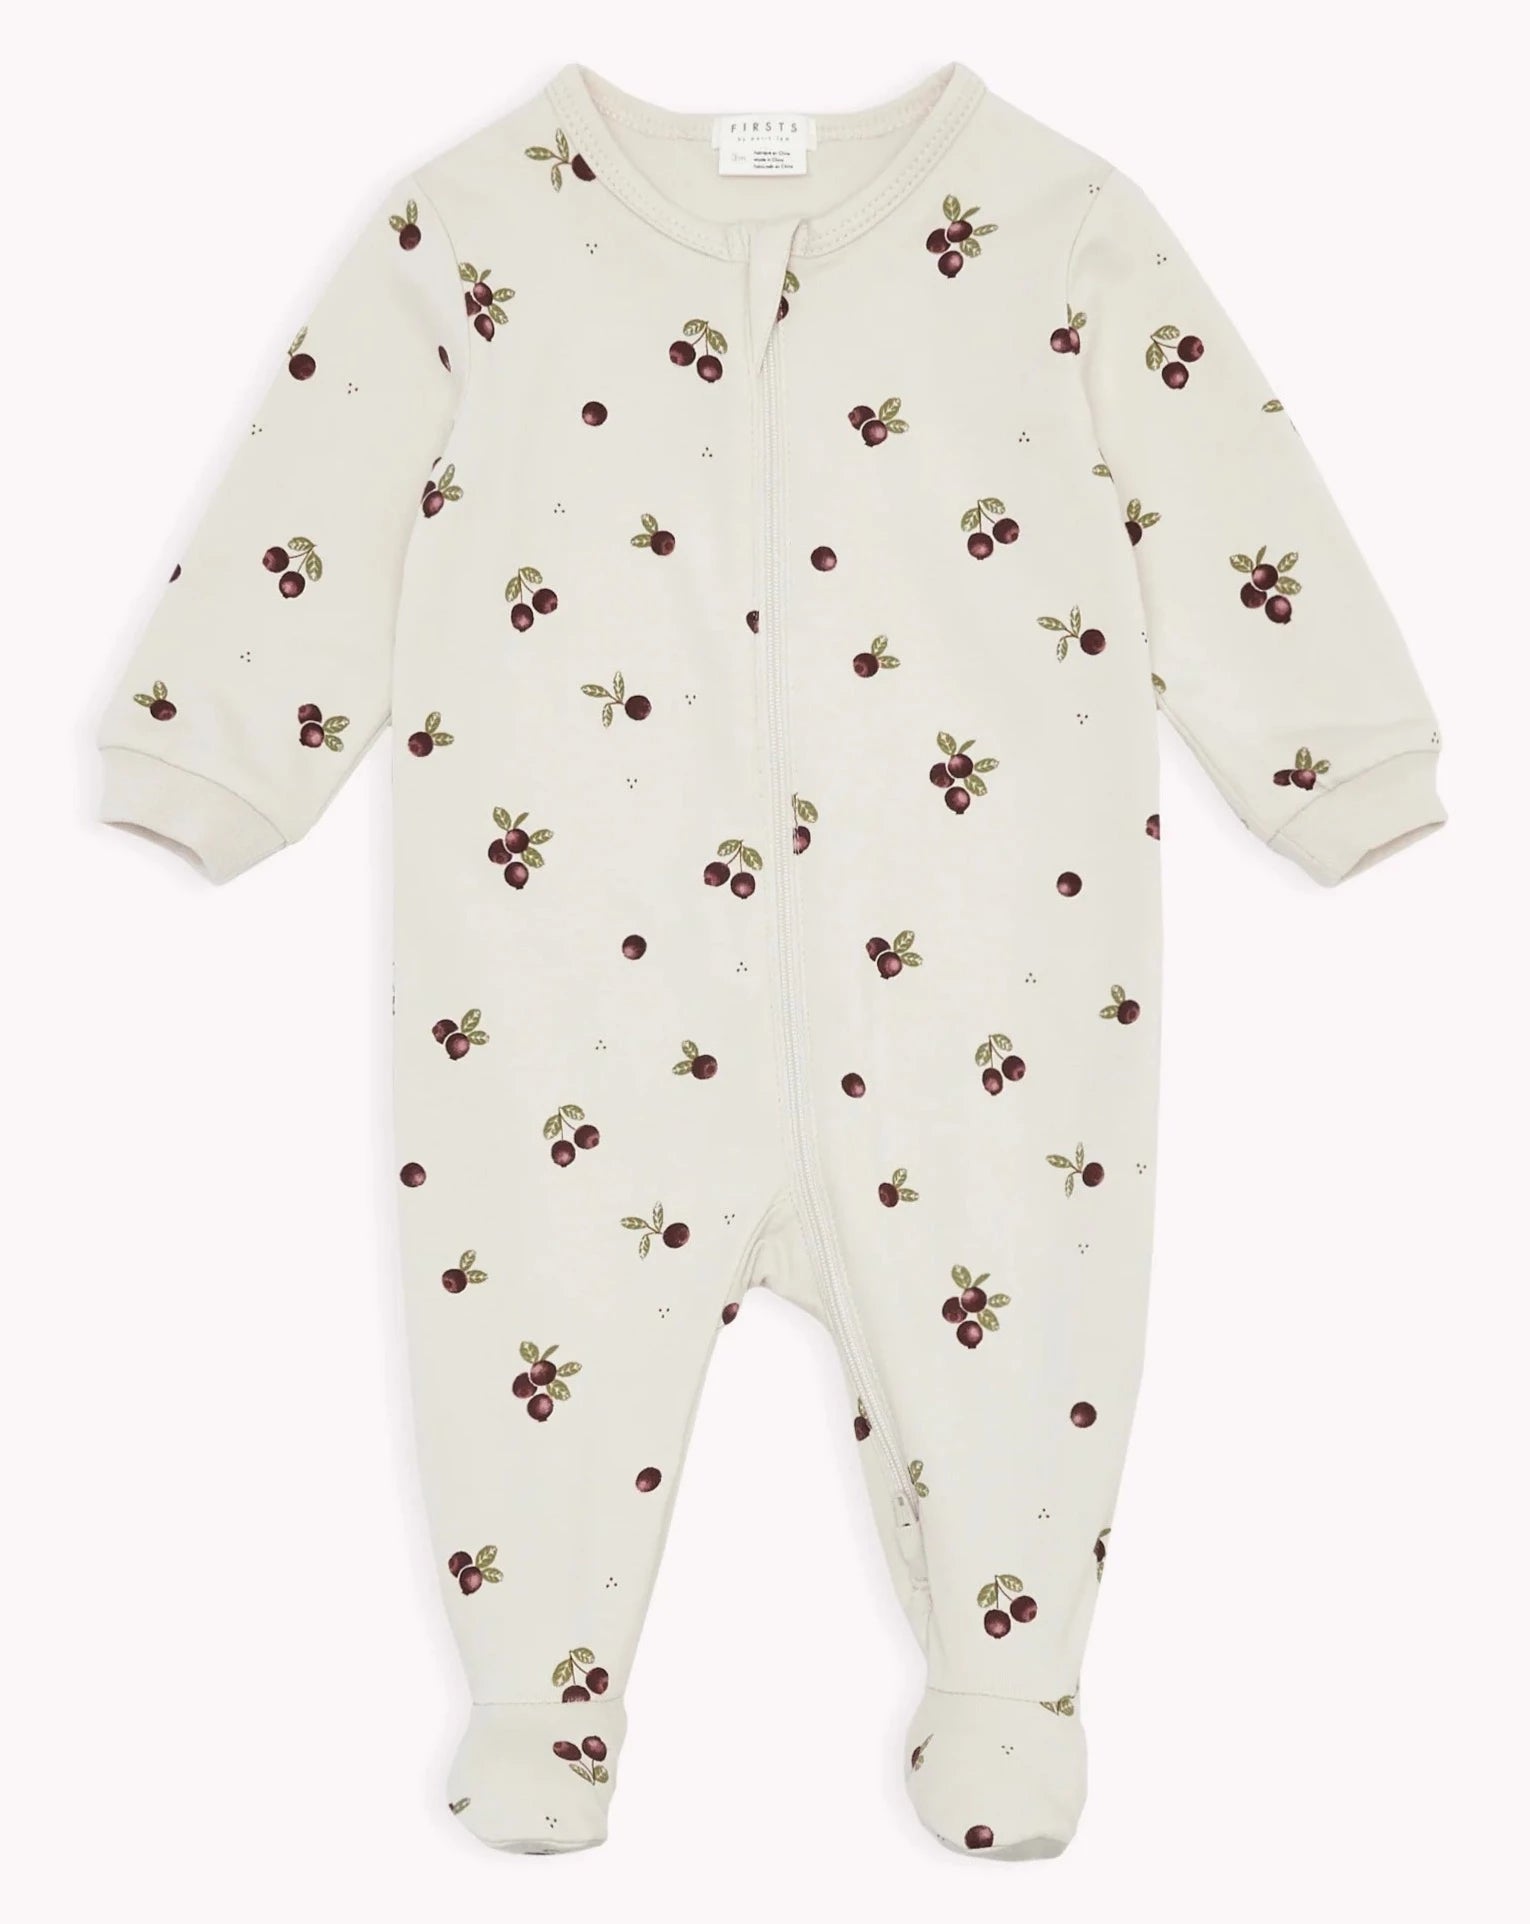 Cranberry Print on Creme Footed Sleeper